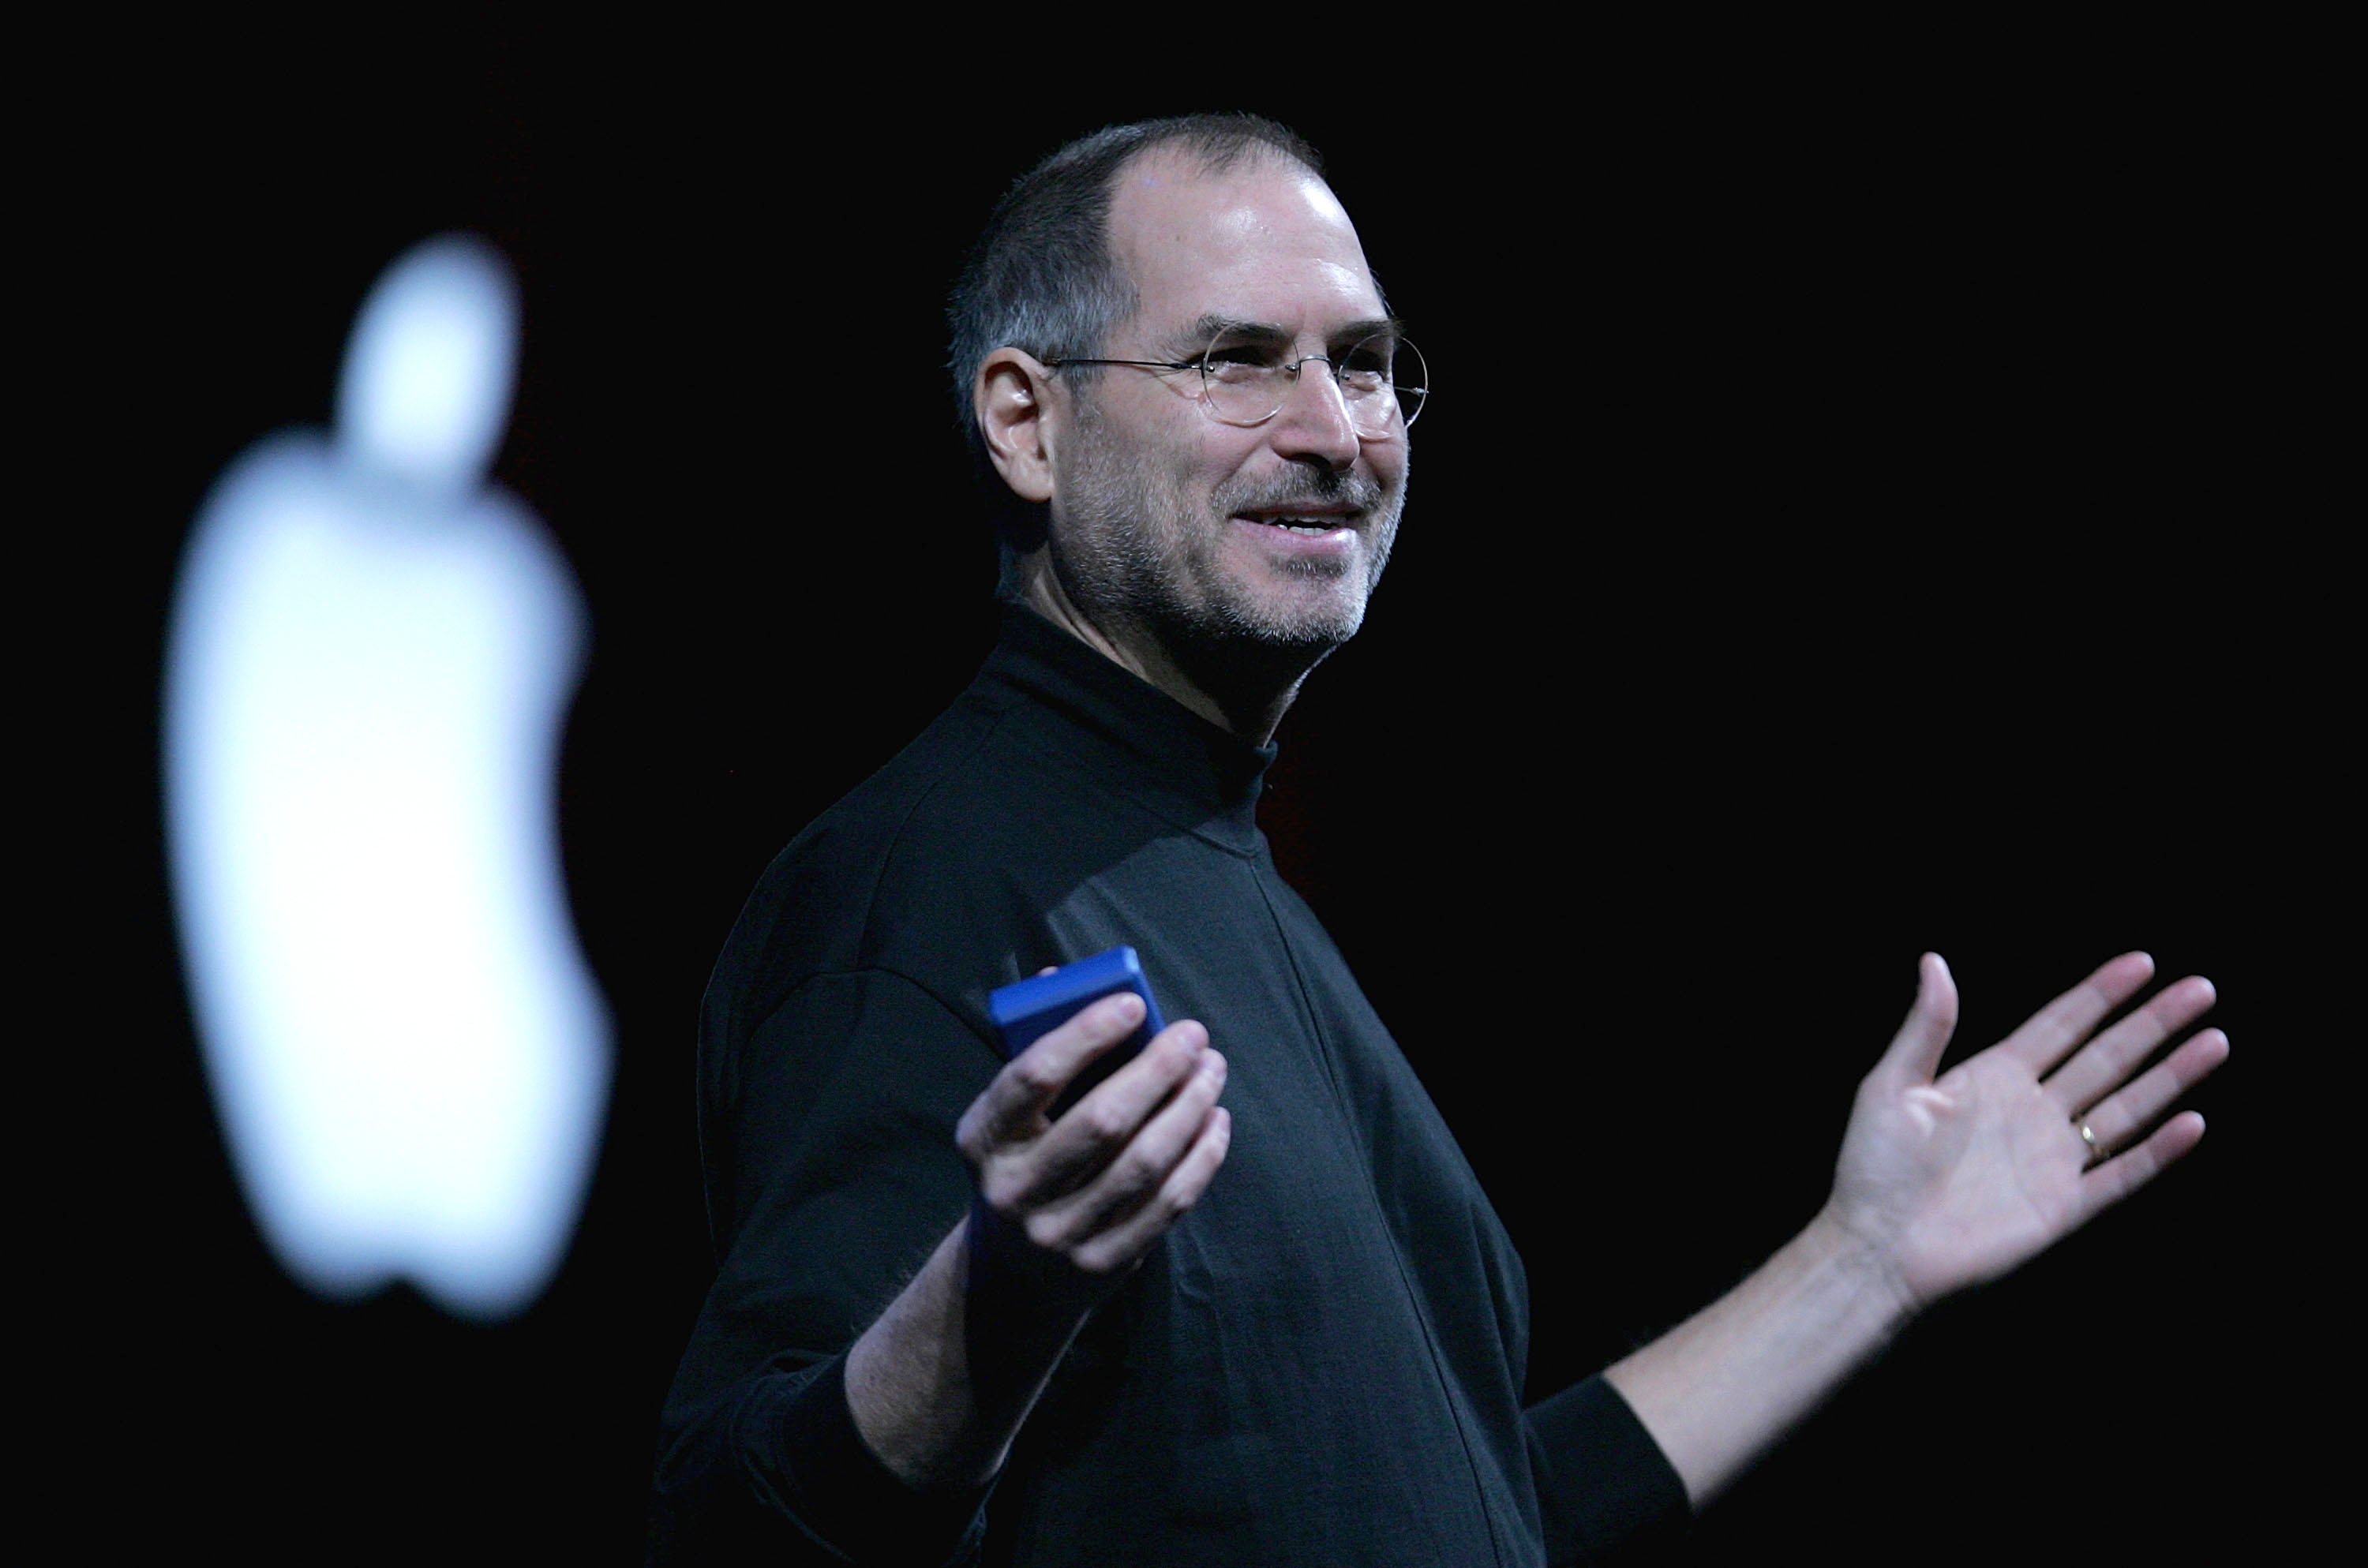 Apple CEO Steve Jobs delivers a keynote address at the 2005 Macworld Expo January 11, 2005 in San Francisco, California. (Justin Sullivan&mdash;Getty Images)